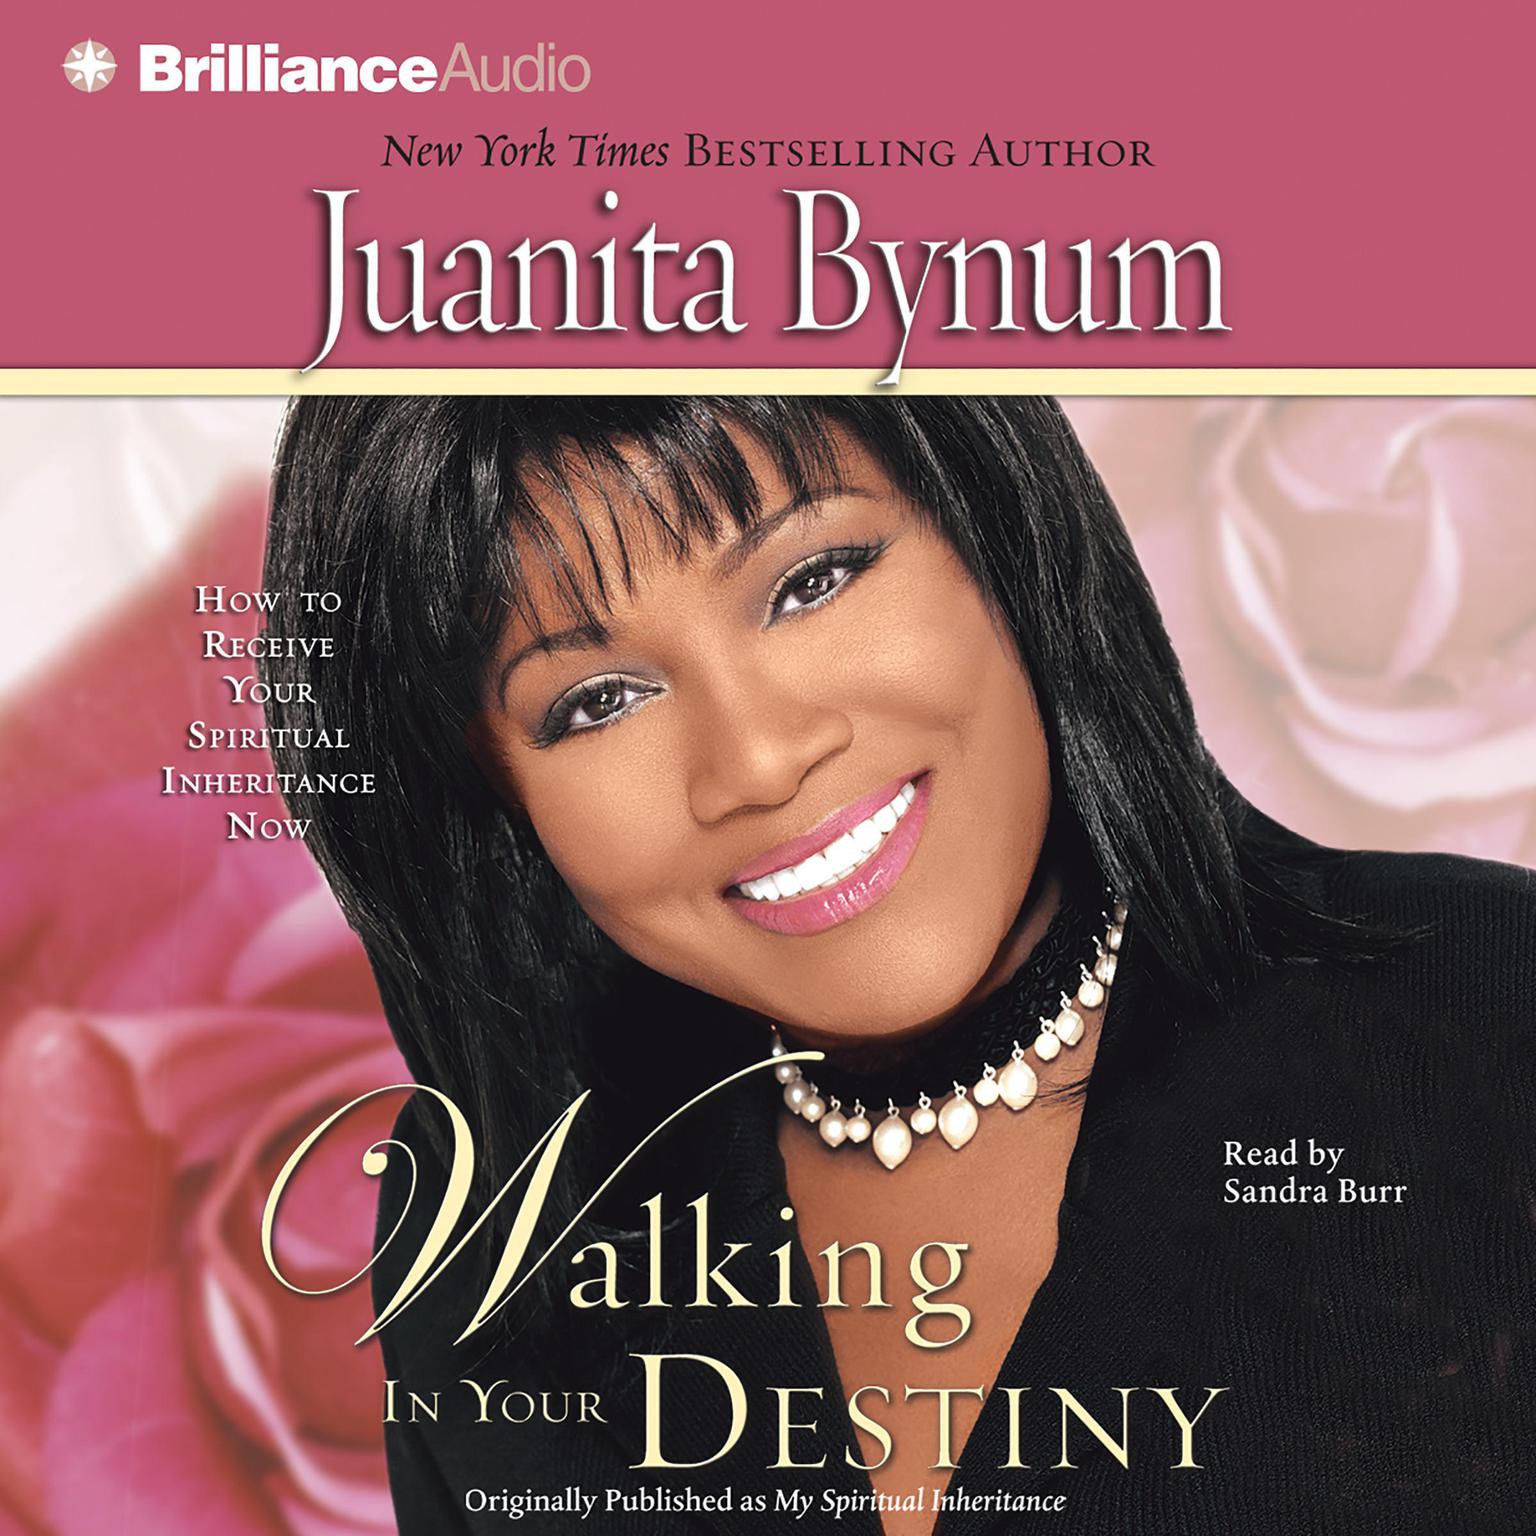 Walking in Your Destiny (Abridged): How to Receive Your Spiritual Inheritance Now Audiobook, by Juanita Bynum